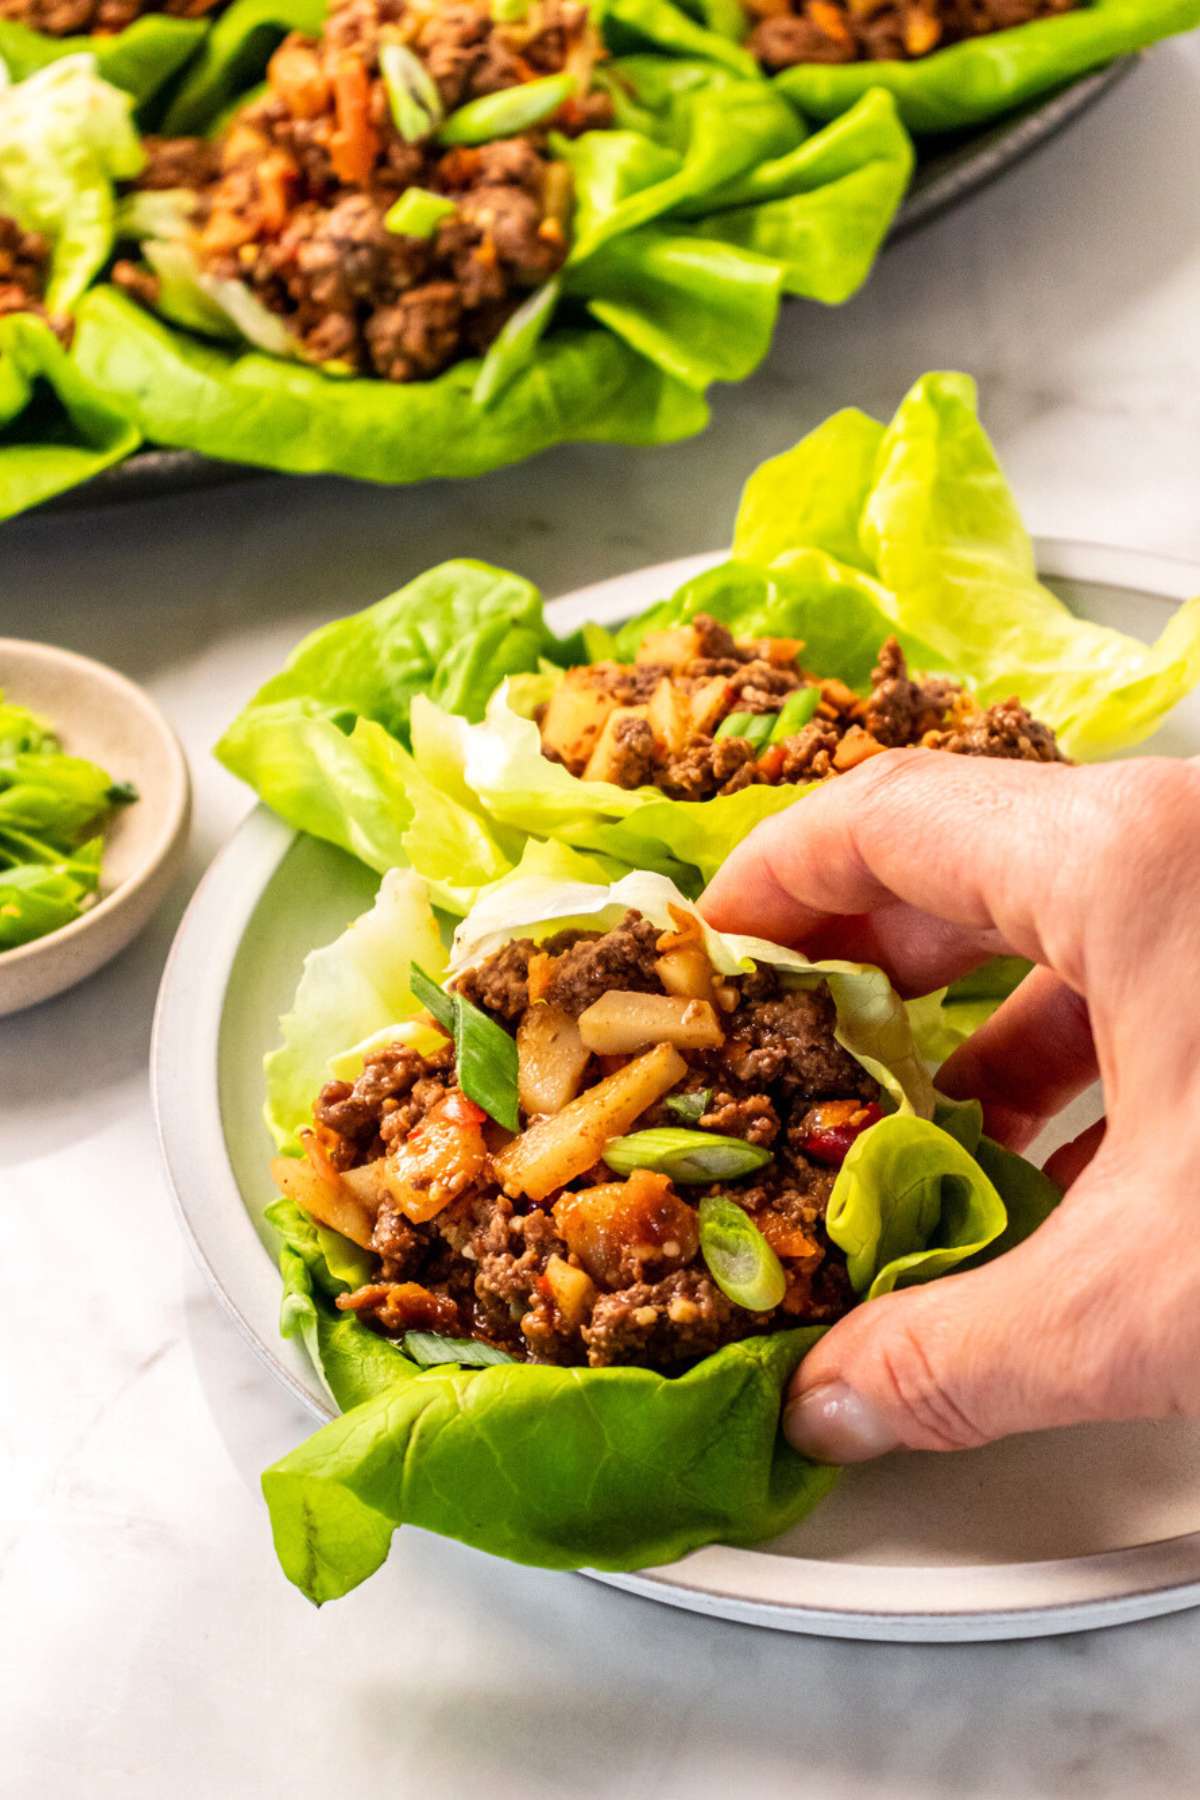 A hand picking up a lettuce wrap with ground beef on a plate.